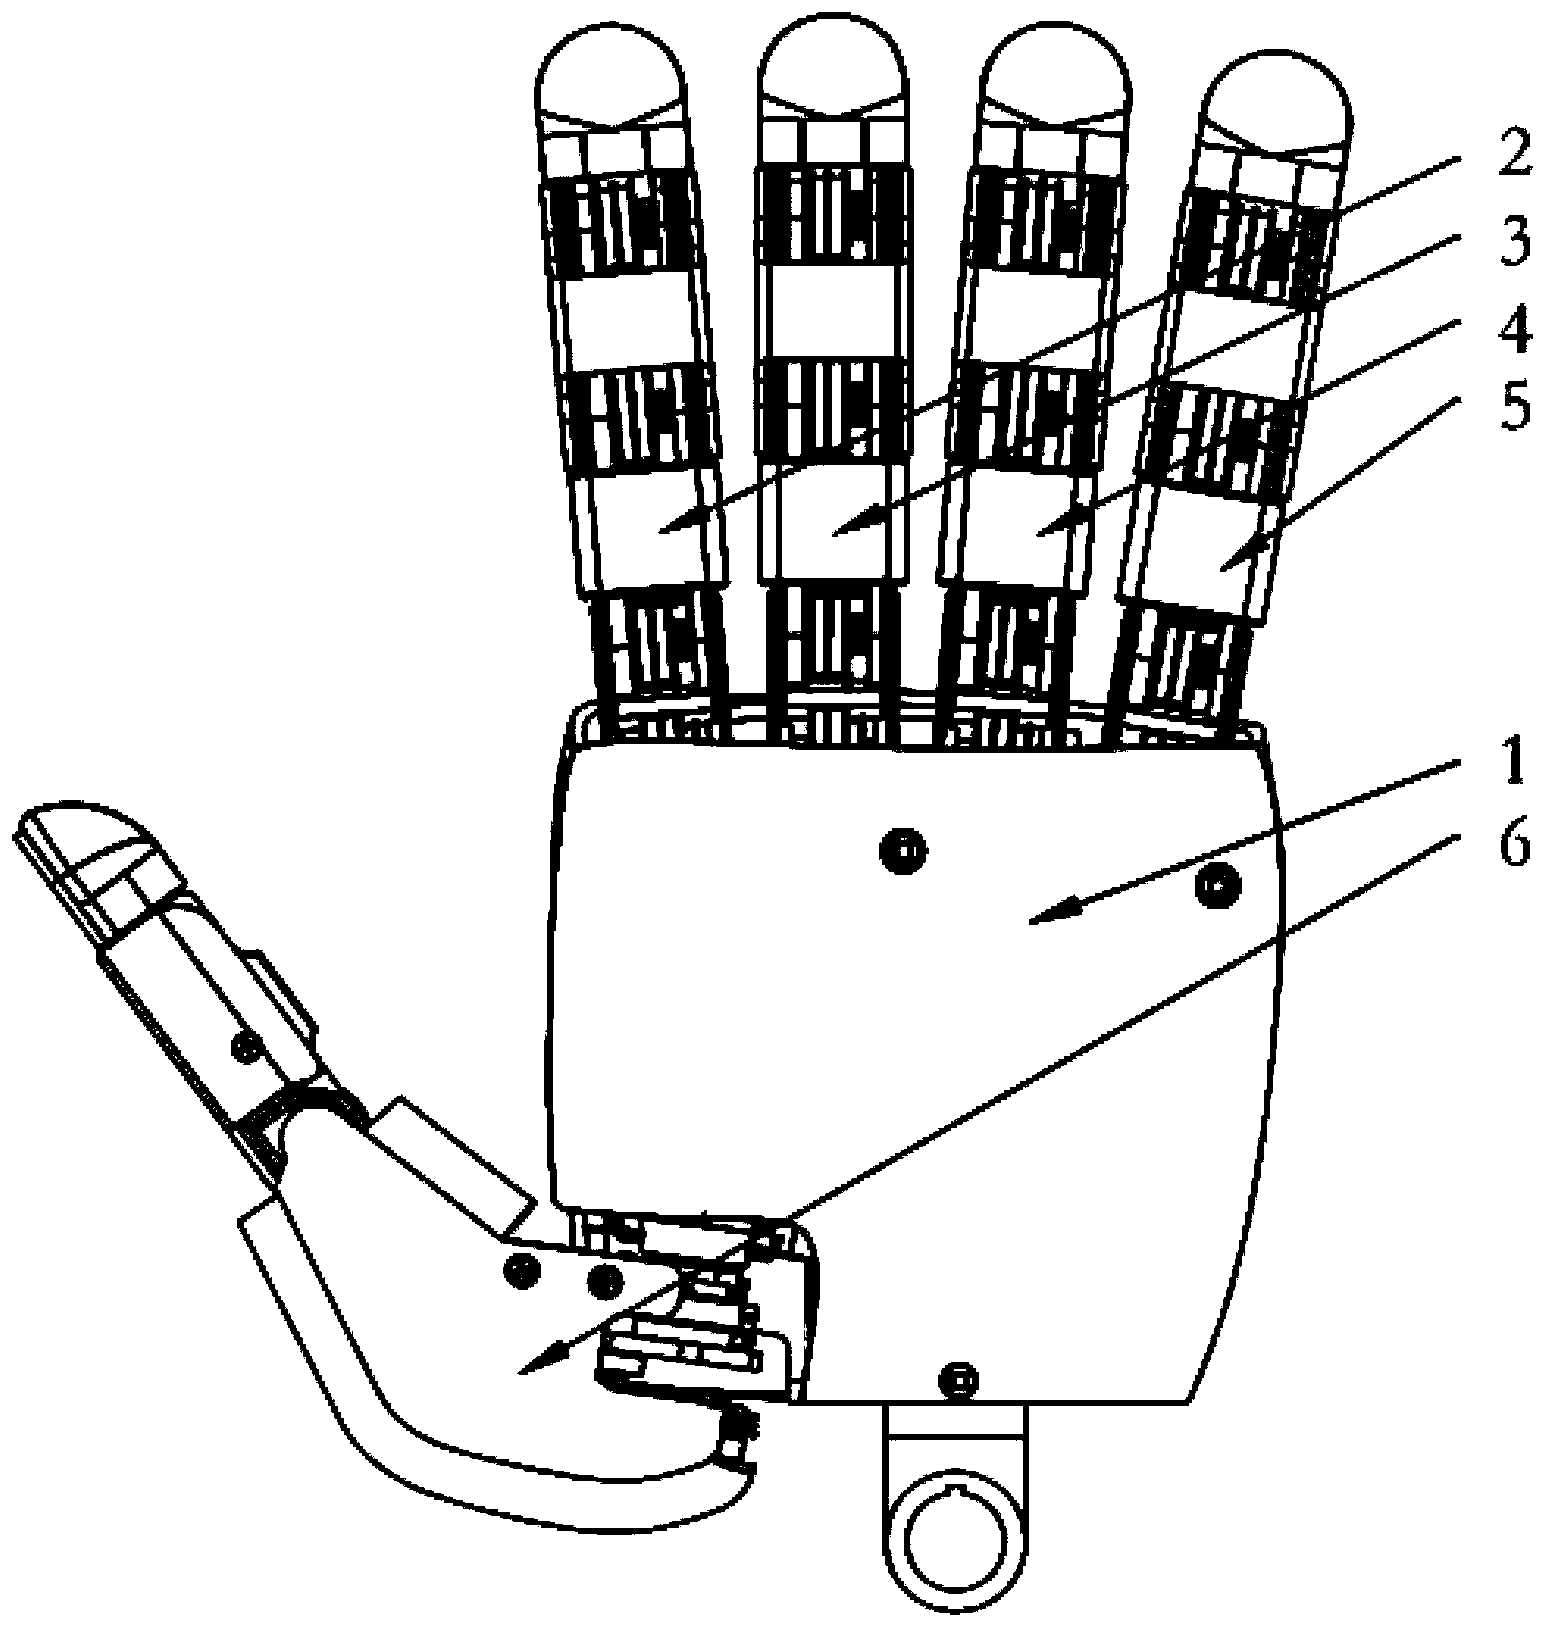 Under-actuated artificial limb hand